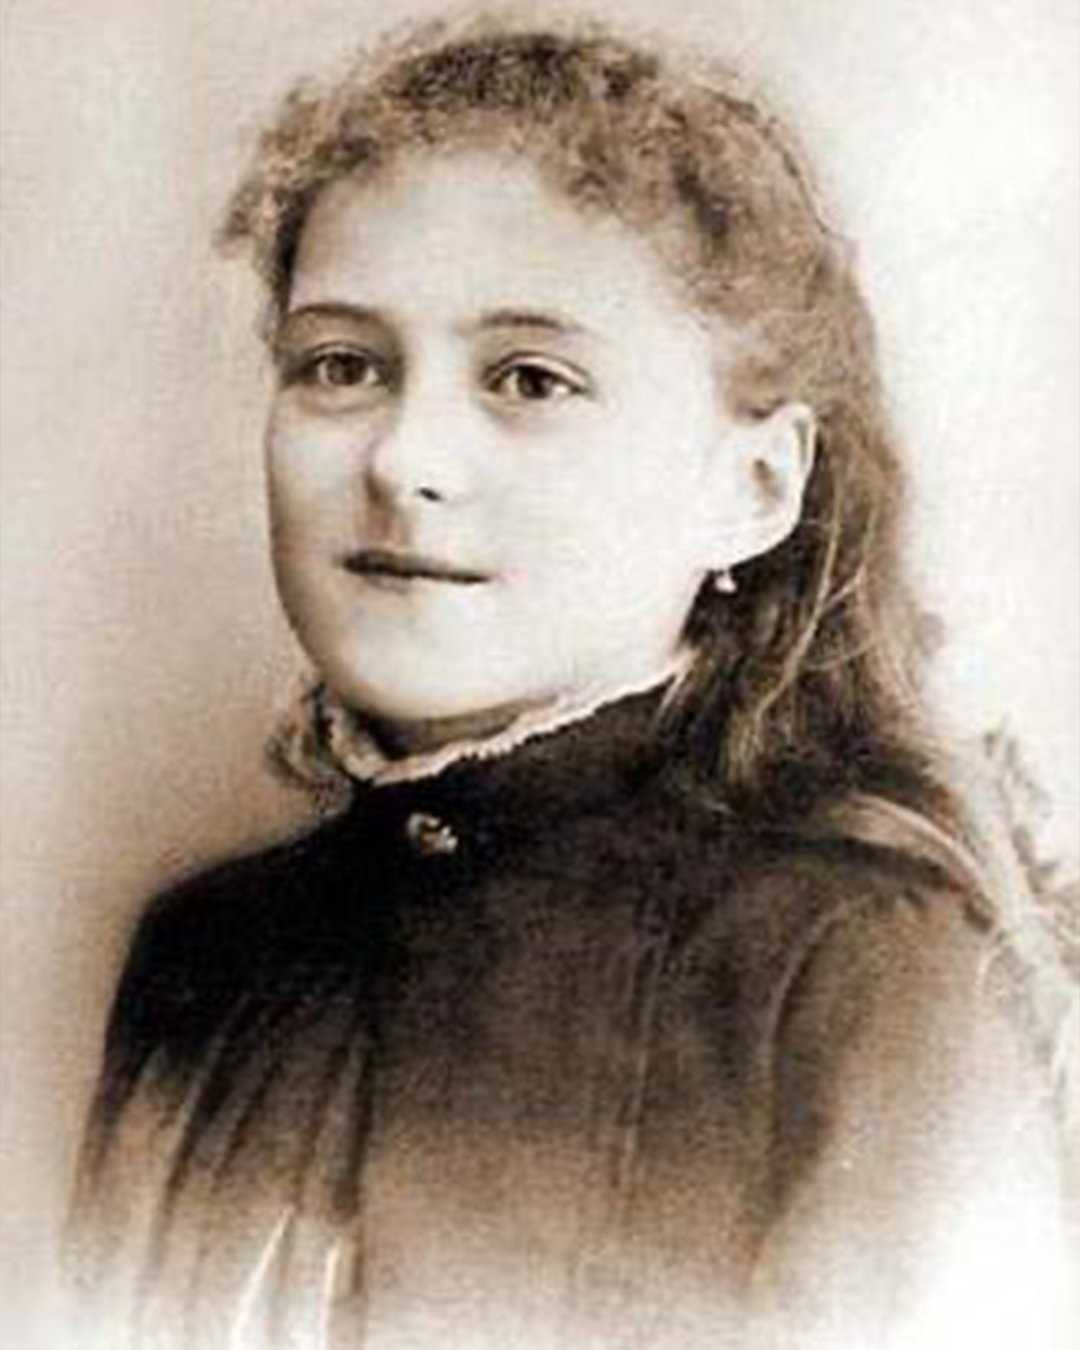  Drawing of St. Therese as a young girl.